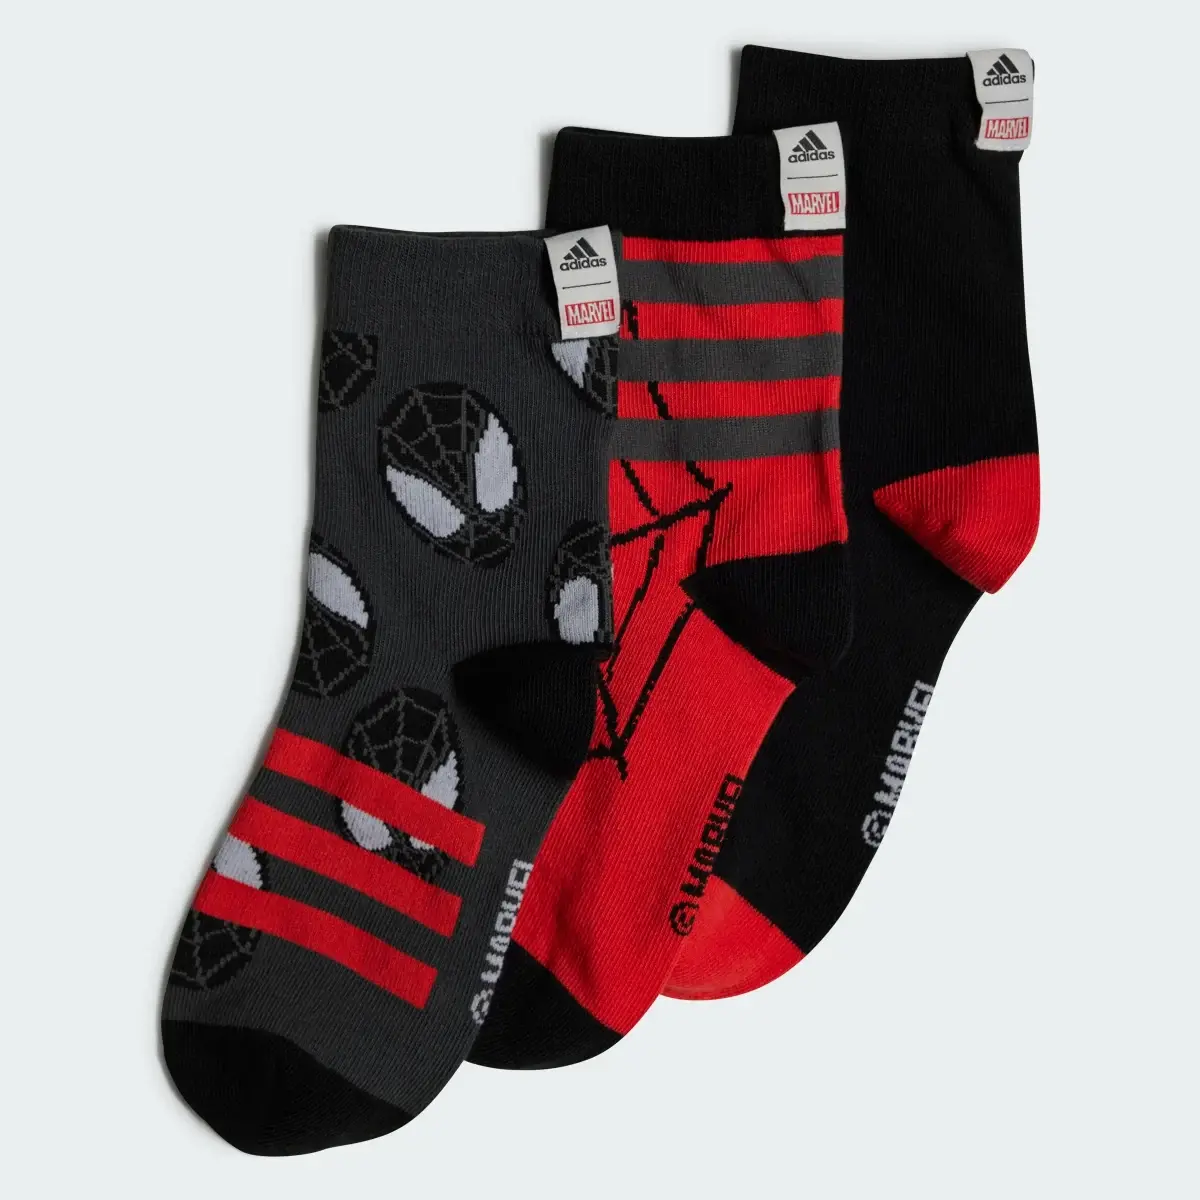 Adidas Chaussettes Marvel Spider-Man (3 paires). 2